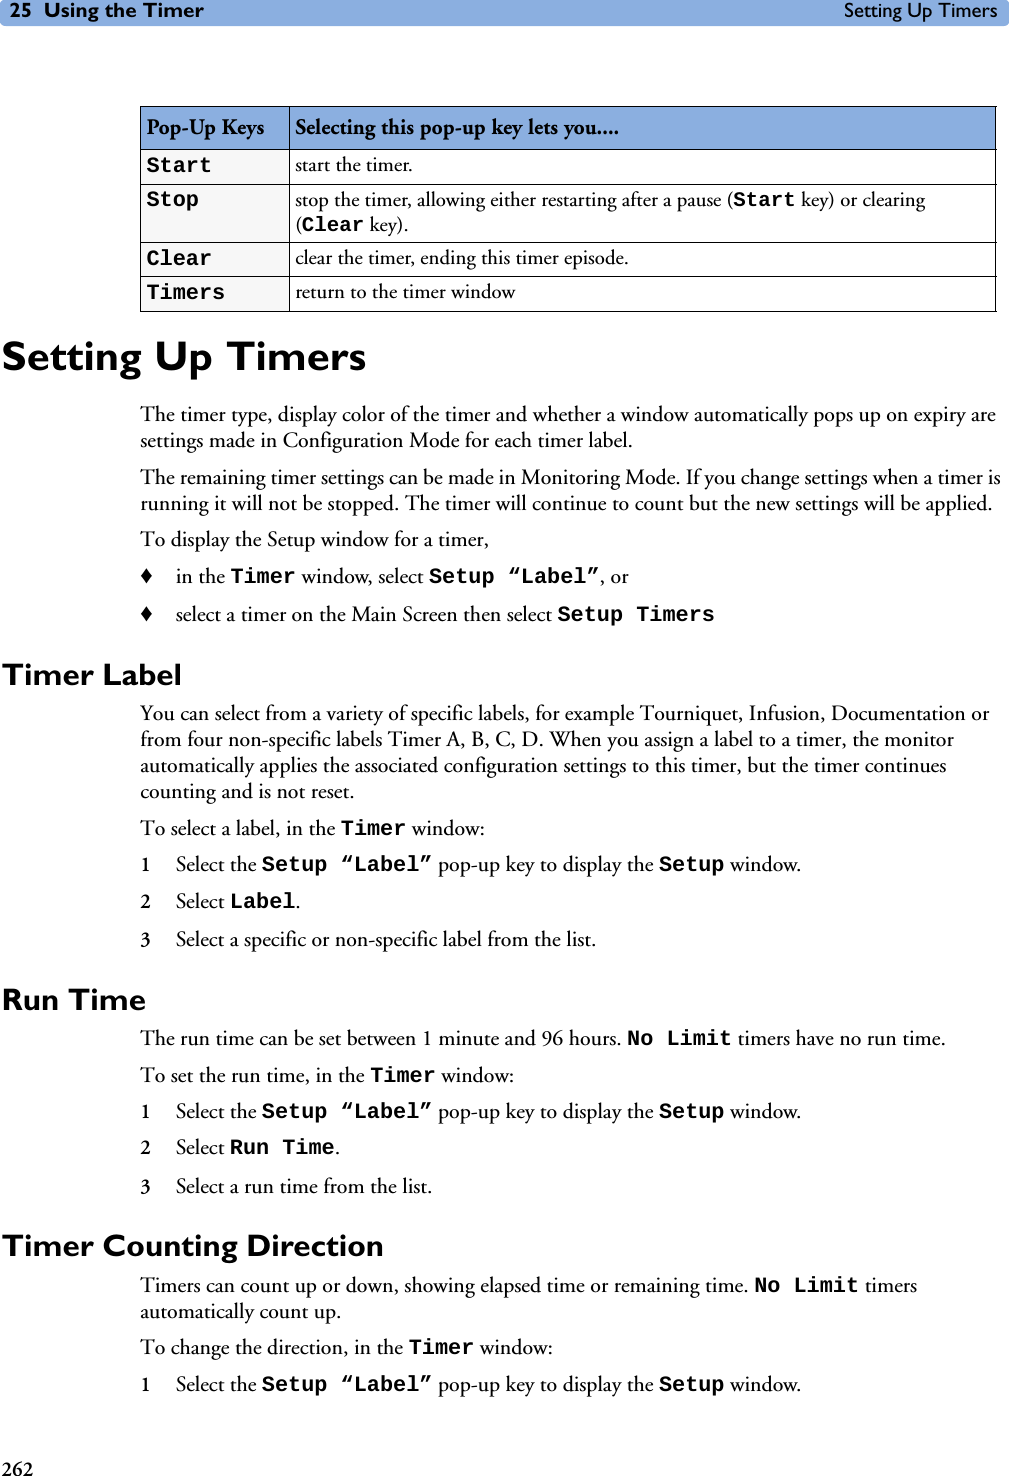 25 Using the Timer Setting Up Timers262Setting Up TimersThe timer type, display color of the timer and whether a window automatically pops up on expiry are settings made in Configuration Mode for each timer label.The remaining timer settings can be made in Monitoring Mode. If you change settings when a timer is running it will not be stopped. The timer will continue to count but the new settings will be applied.To display the Setup window for a timer,♦in the Timer window, select Setup “Label”, or ♦select a timer on the Main Screen then select Setup TimersTimer LabelYou can select from a variety of specific labels, for example Tourniquet, Infusion, Documentation or from four non-specific labels Timer A, B, C, D. When you assign a label to a timer, the monitor automatically applies the associated configuration settings to this timer, but the timer continues counting and is not reset.To select a label, in the Timer window:1Select the Setup “Label” pop-up key to display the Setup window.2Select Label.3Select a specific or non-specific label from the list.Run TimeThe run time can be set between 1 minute and 96 hours. No Limit timers have no run time.To set the run time, in the Timer window:1Select the Setup “Label” pop-up key to display the Setup window.2Select Run Time.3Select a run time from the list.Timer Counting DirectionTimers can count up or down, showing elapsed time or remaining time. No Limit timers automatically count up.To change the direction, in the Timer window:1Select the Setup “Label” pop-up key to display the Setup window.Pop-Up Keys Selecting this pop-up key lets you....Start start the timer. Stop stop the timer, allowing either restarting after a pause (Start key) or clearing (Clear key).Clear clear the timer, ending this timer episode.Timers return to the timer window 